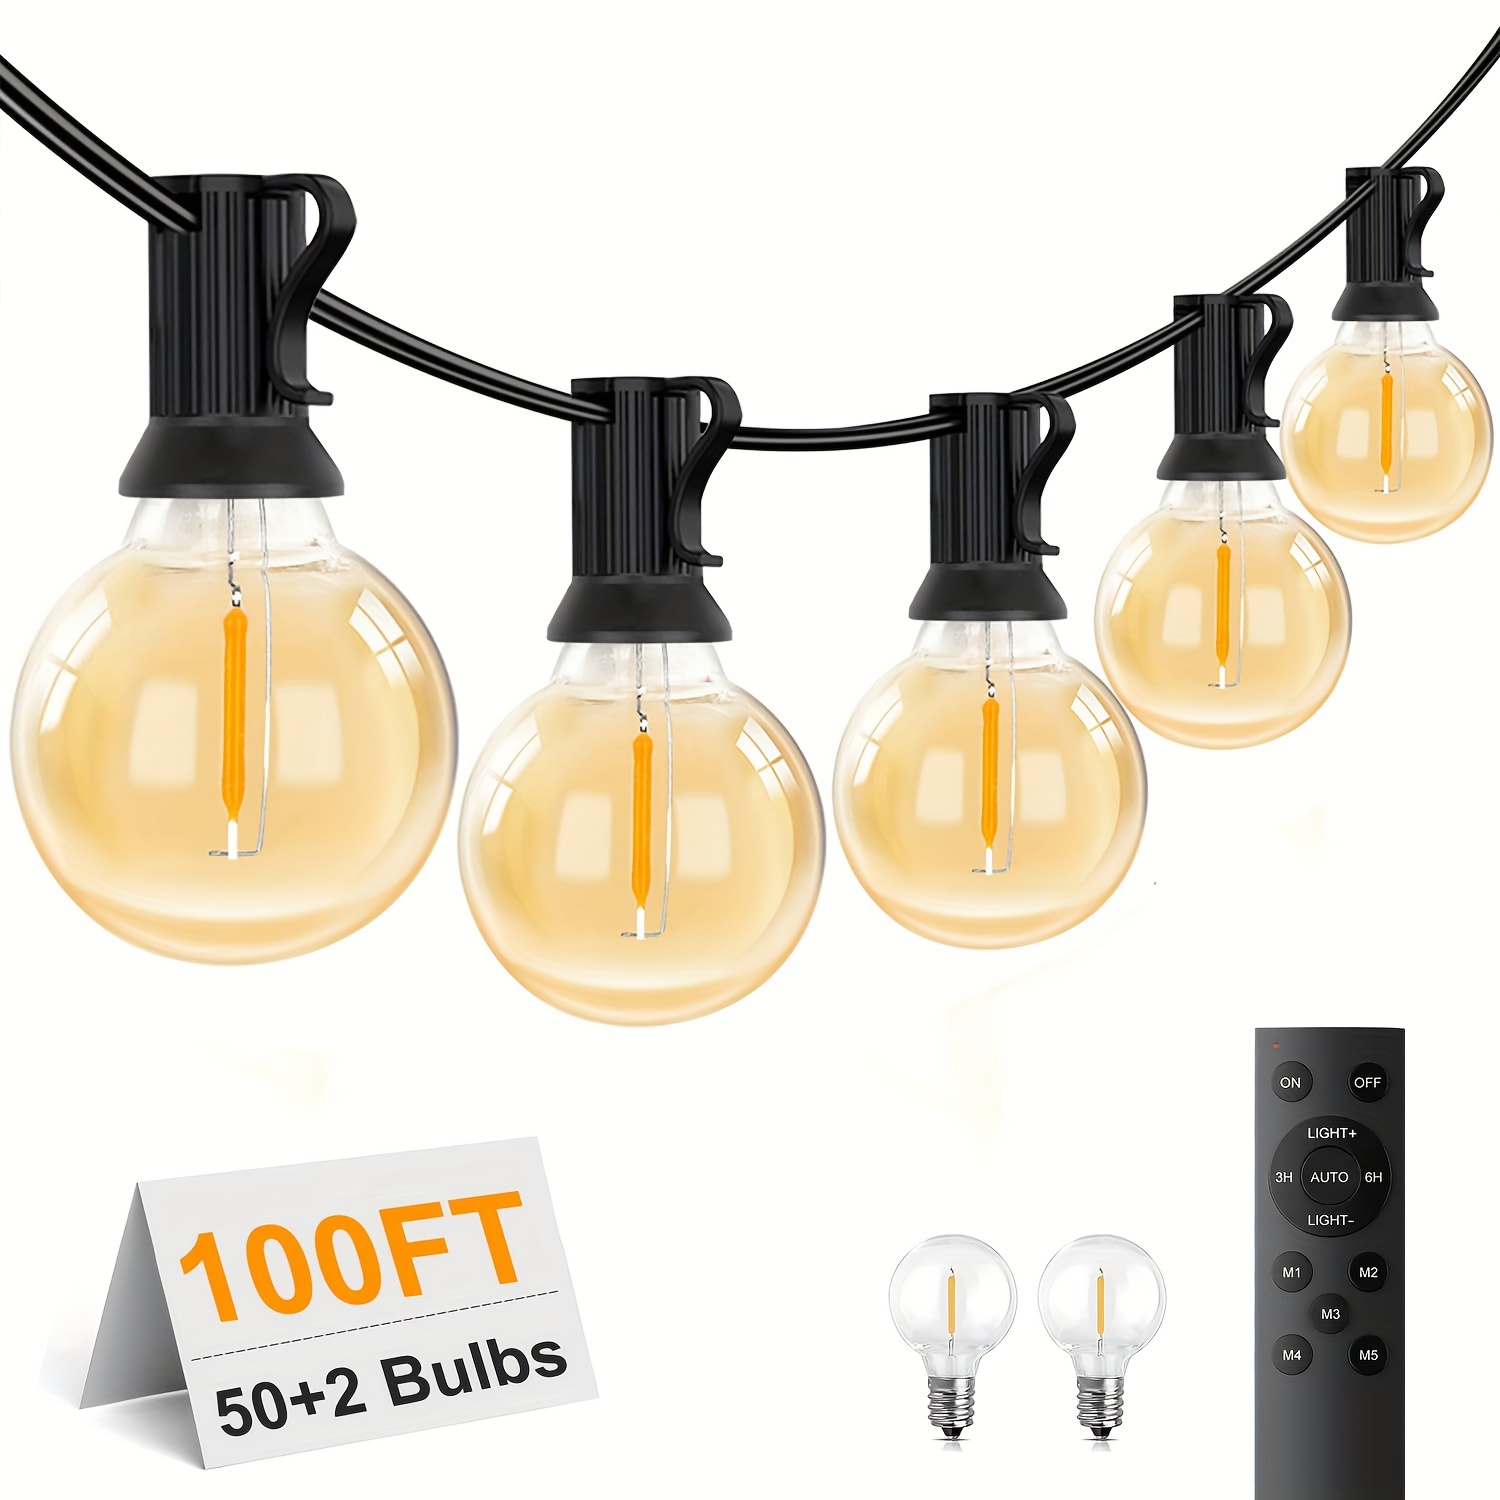 

30m Outdoor String Lights Mains Powered, G40 Globe Festoon Lights With 52 Led Shatterproof Bulbs, 5 Modes, Commercial Garden Hanging Lights For Patio Backyard Party Decor, E12 Socket Base, Black